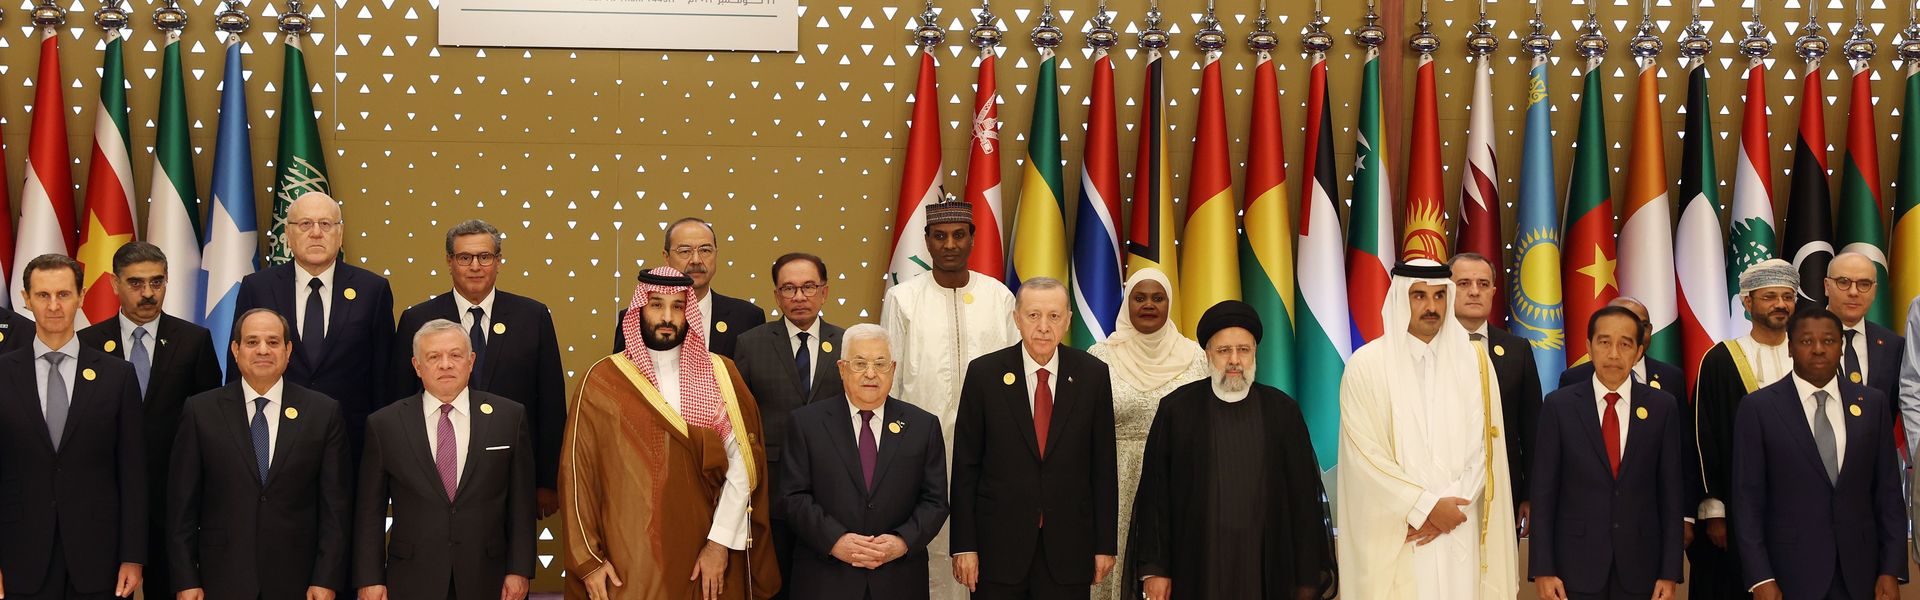 Turkish President Recep Tayyip Erdogan (5th R) poses for a family photo during the Extraordinary Joint Summit of the Organization of Islamic Cooperation and the Arab League at King Abdulaziz International Conference Center in Riyadh, Saudi Arabia on November 11, 2023. 